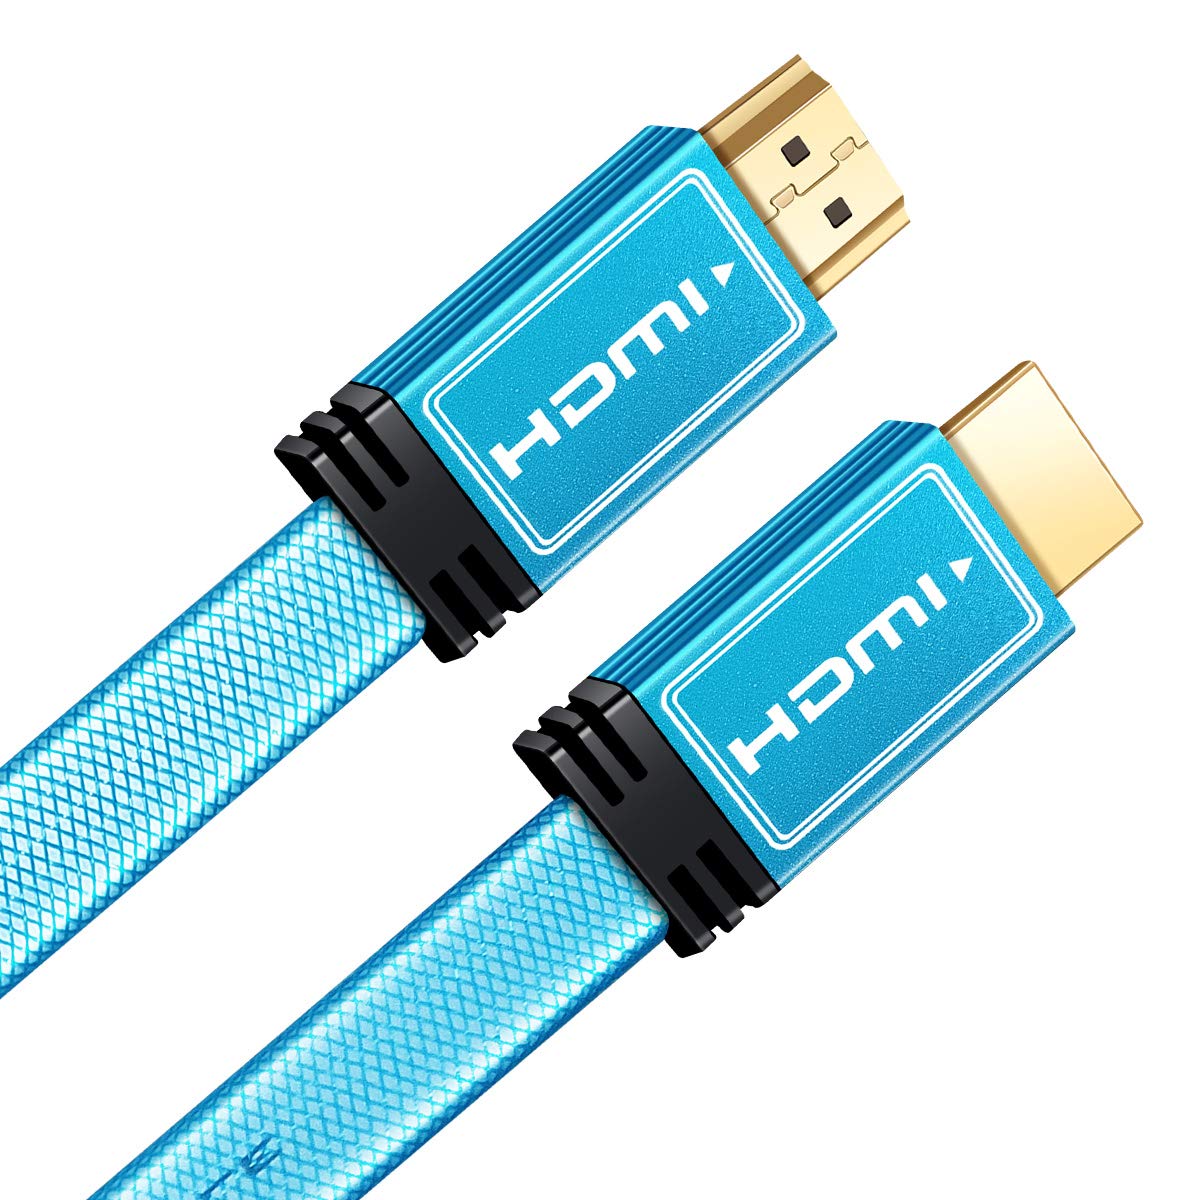 4K HDMI Cable High Speed 24Gbps Flat HDMI 2.0 Cable - 24AWG Nylon Braided  HDMI Cord - HDCP 2.2-4K HDR, 3D, 2160P, 1080P - Compatible with TV,  Blu-ray, 